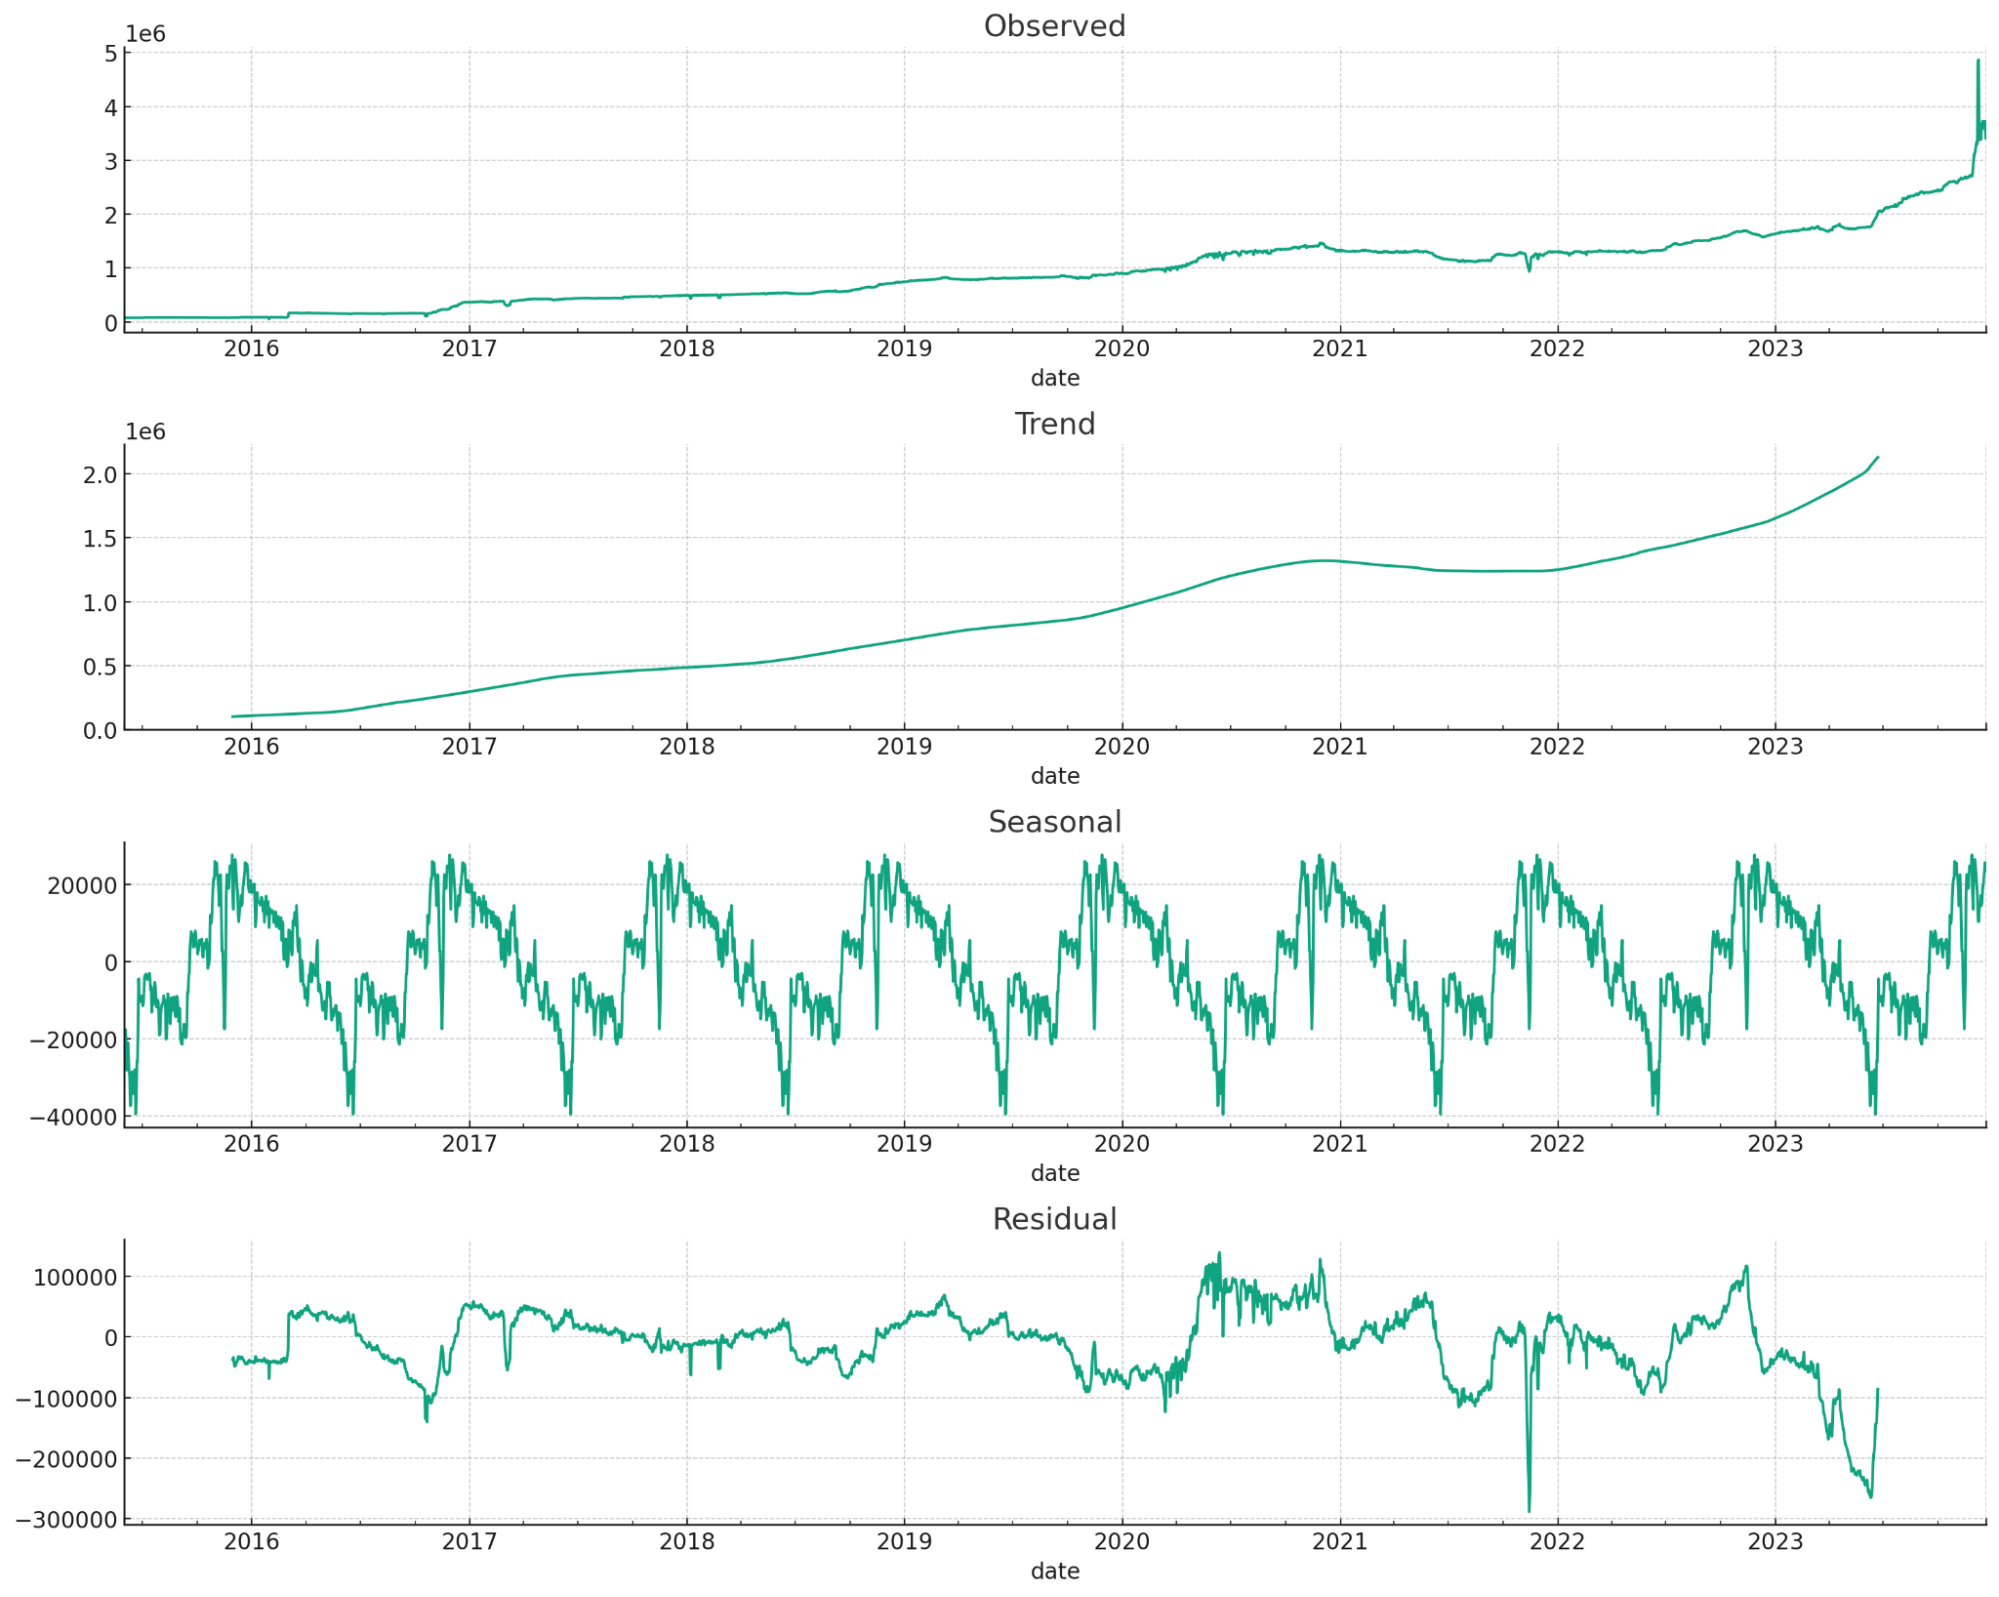 Forecasted time series data for organic traffic